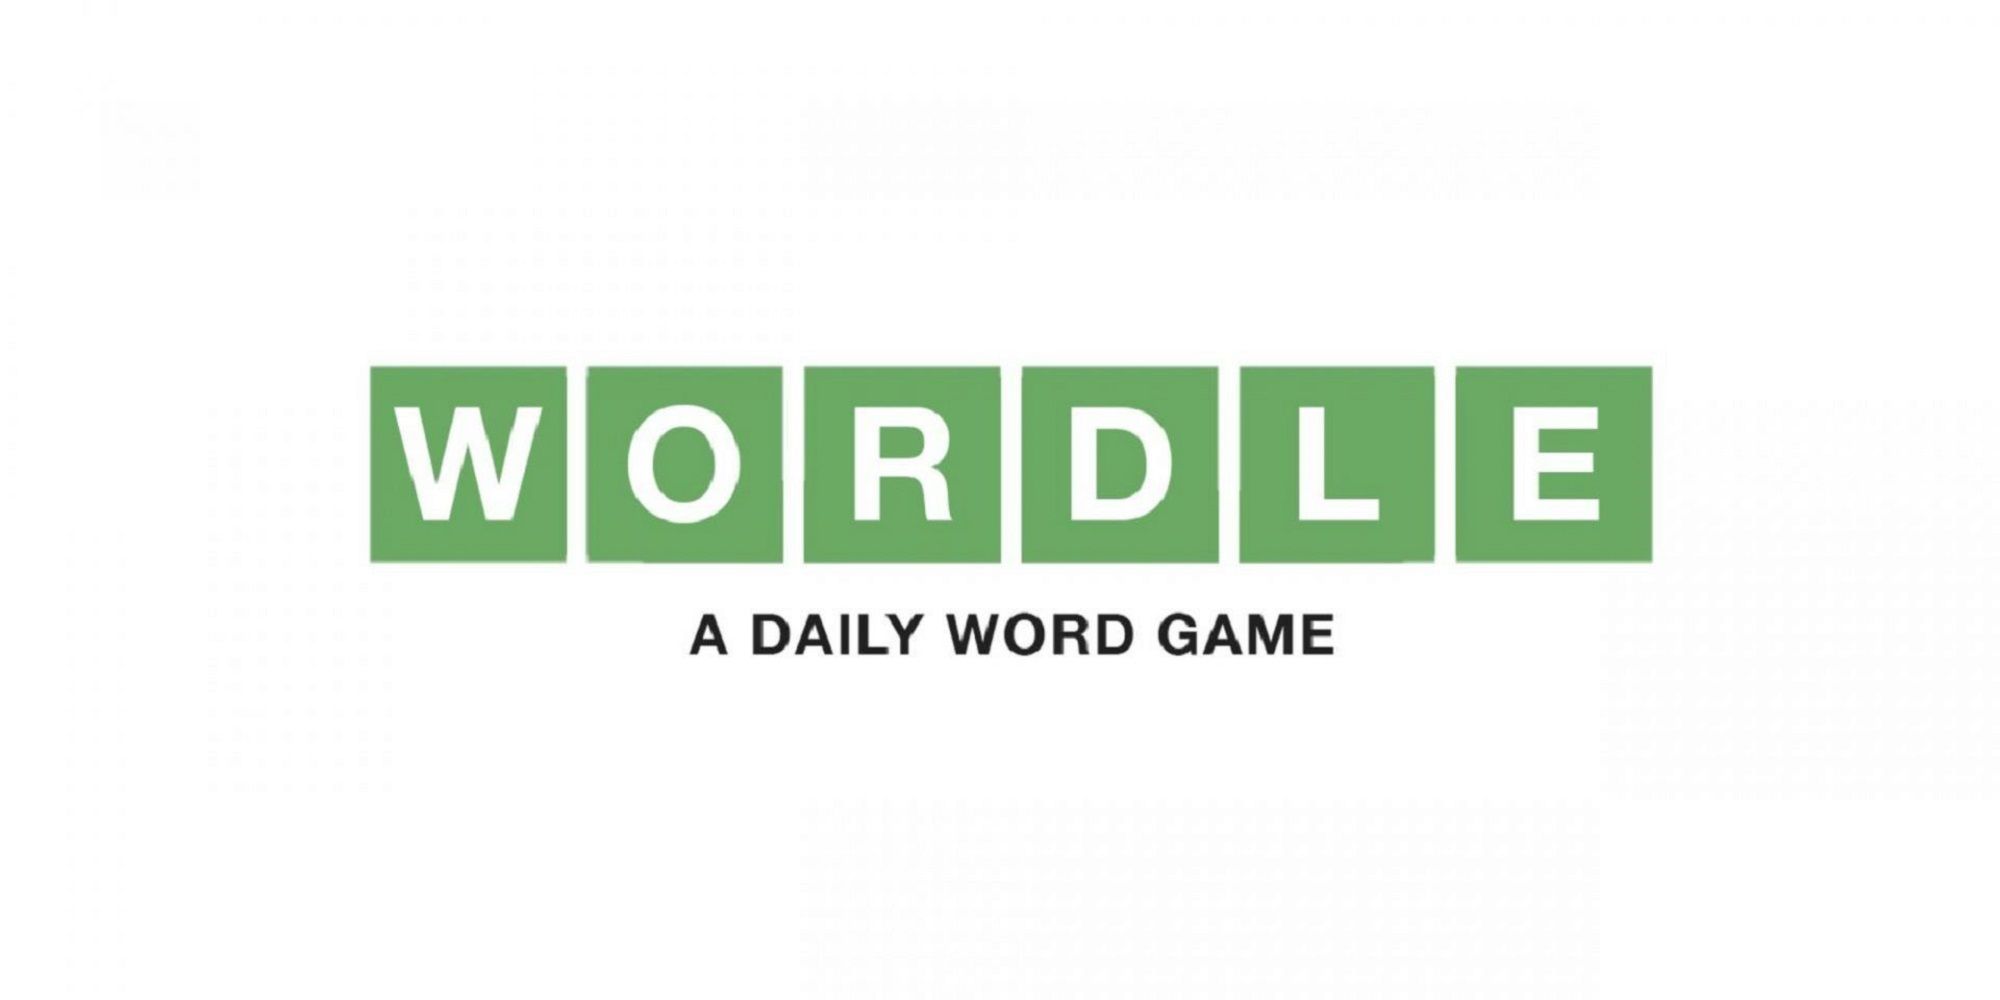 Wordle official logo